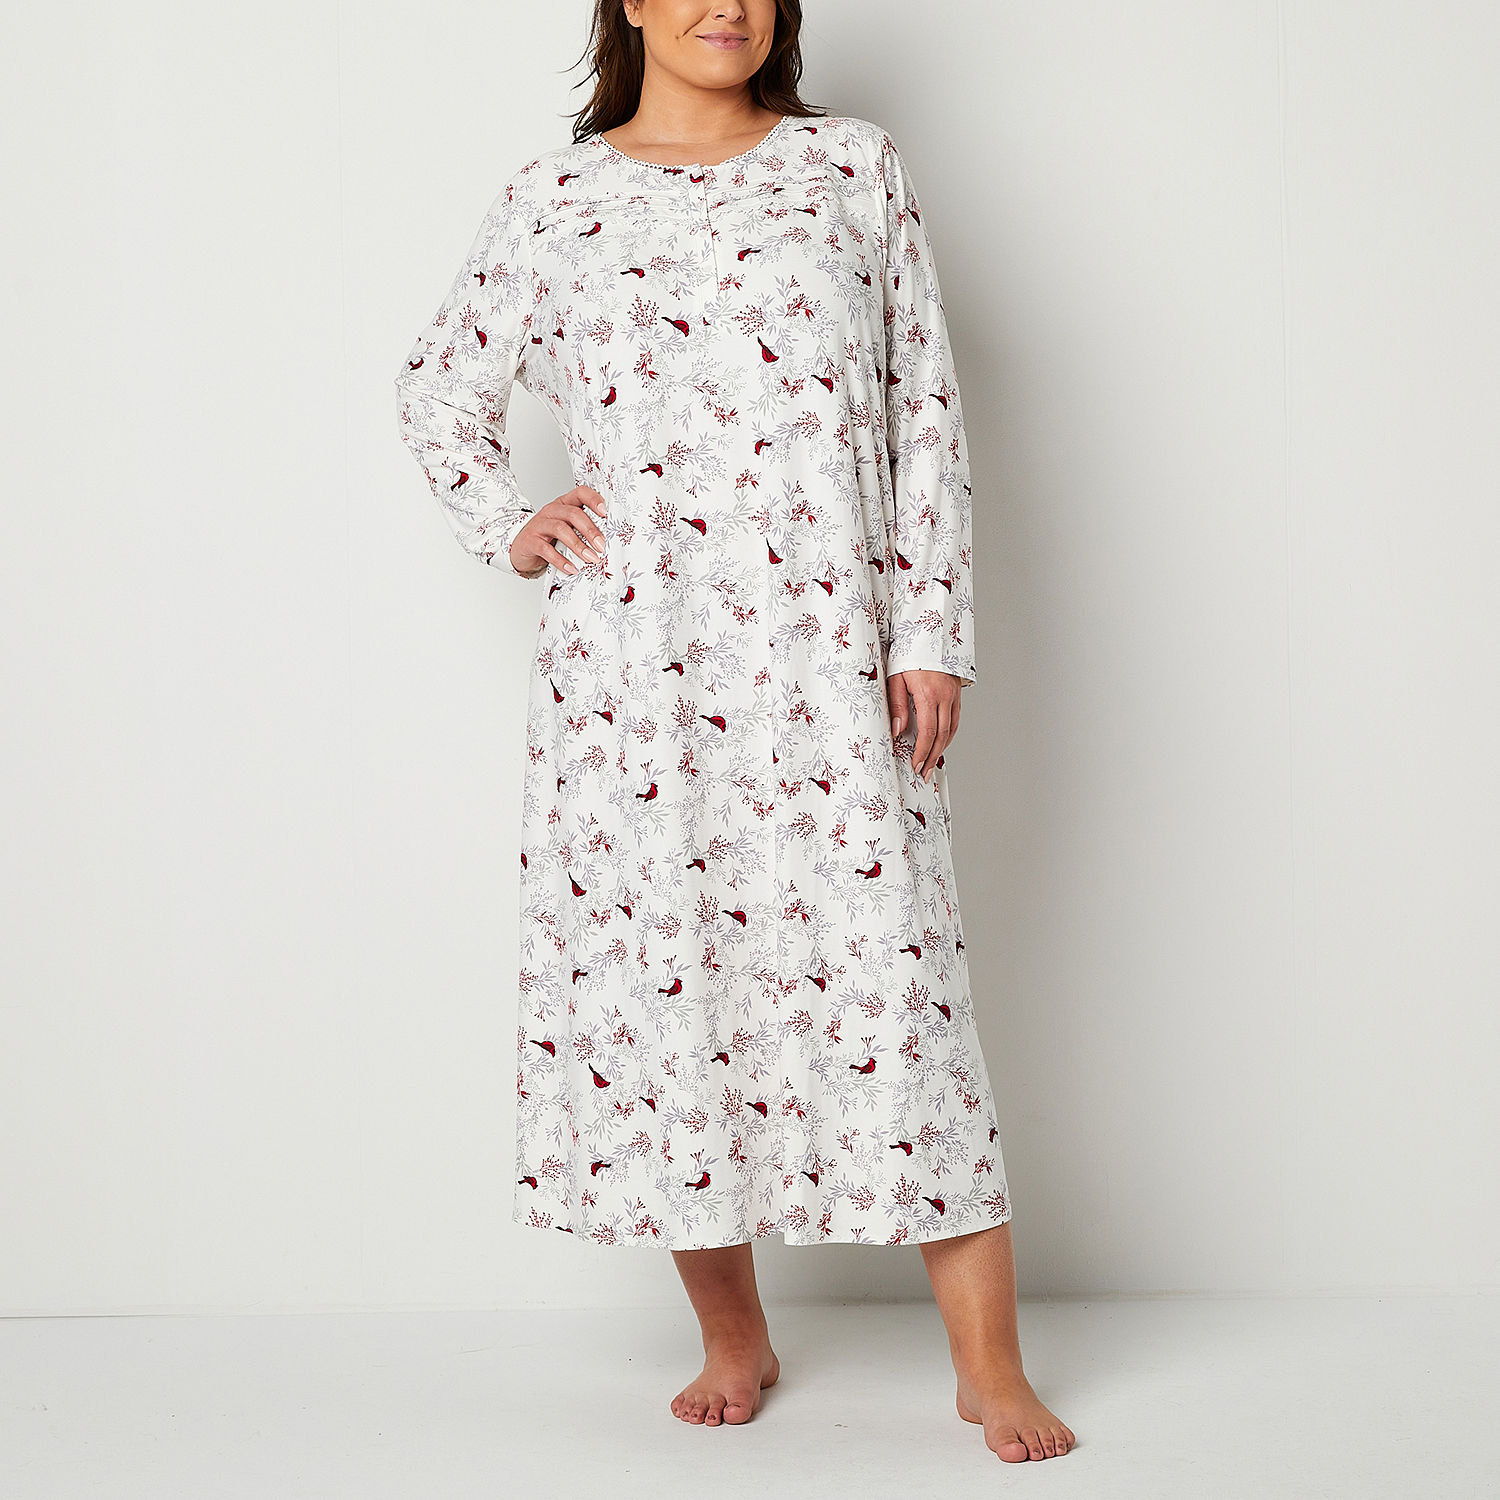 Adonna Womens Plus Long Sleeve Crew Neck Nightgown - JCPenney